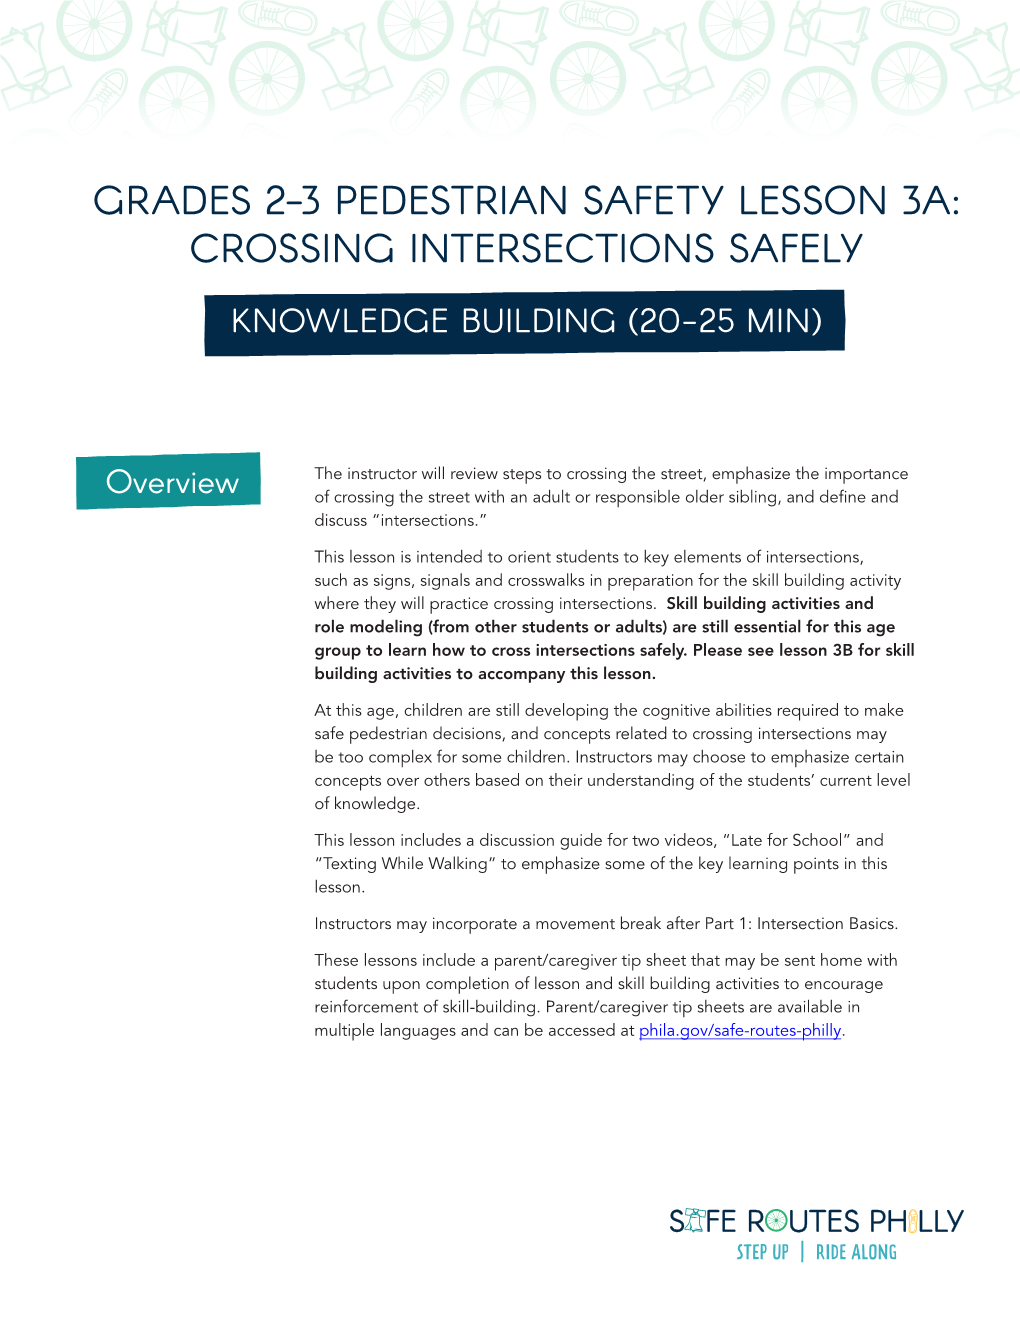 Grades 2-3 Pedestrian Safety Lesson 3A: Crossing Intersections Safely